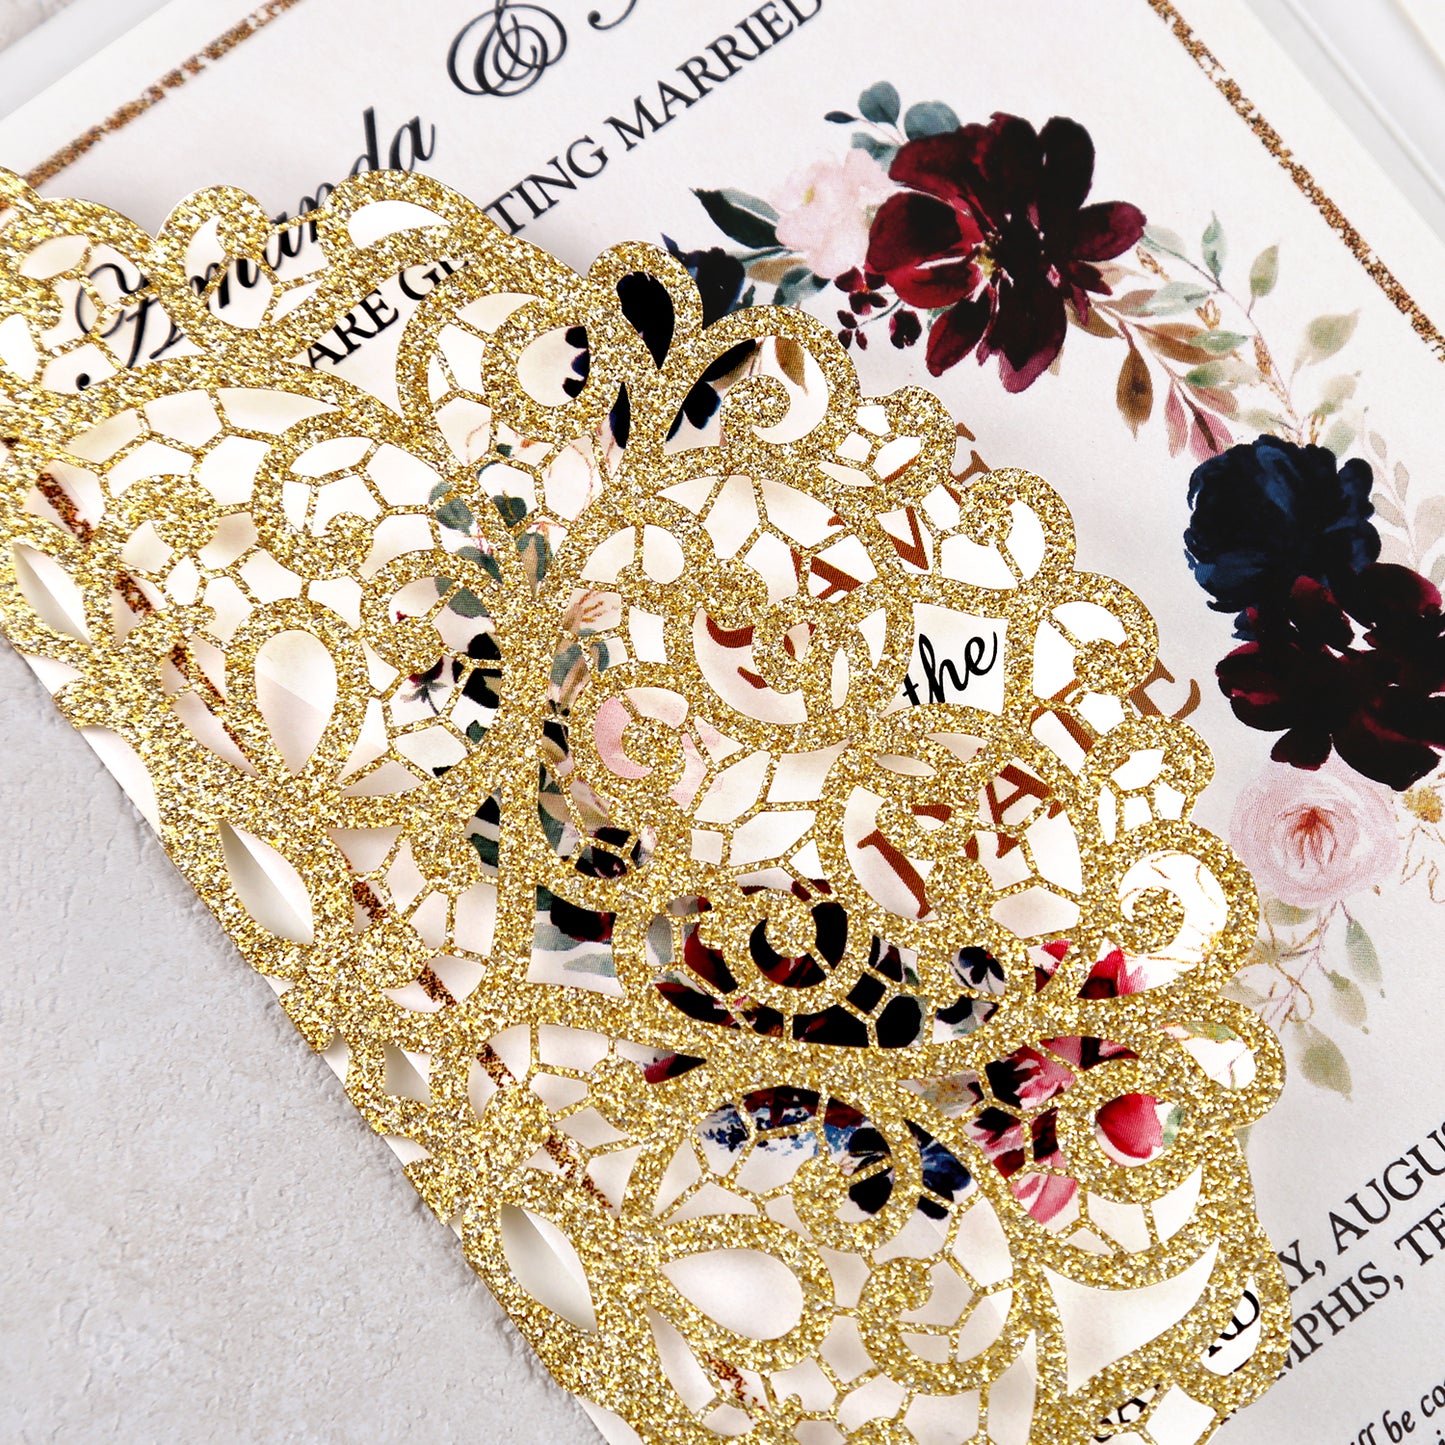 4.7 x7 inch Gold Glitter Laser Cut Hollow Rose Wedding Invitations Cards with Envelopes for Wedding Party